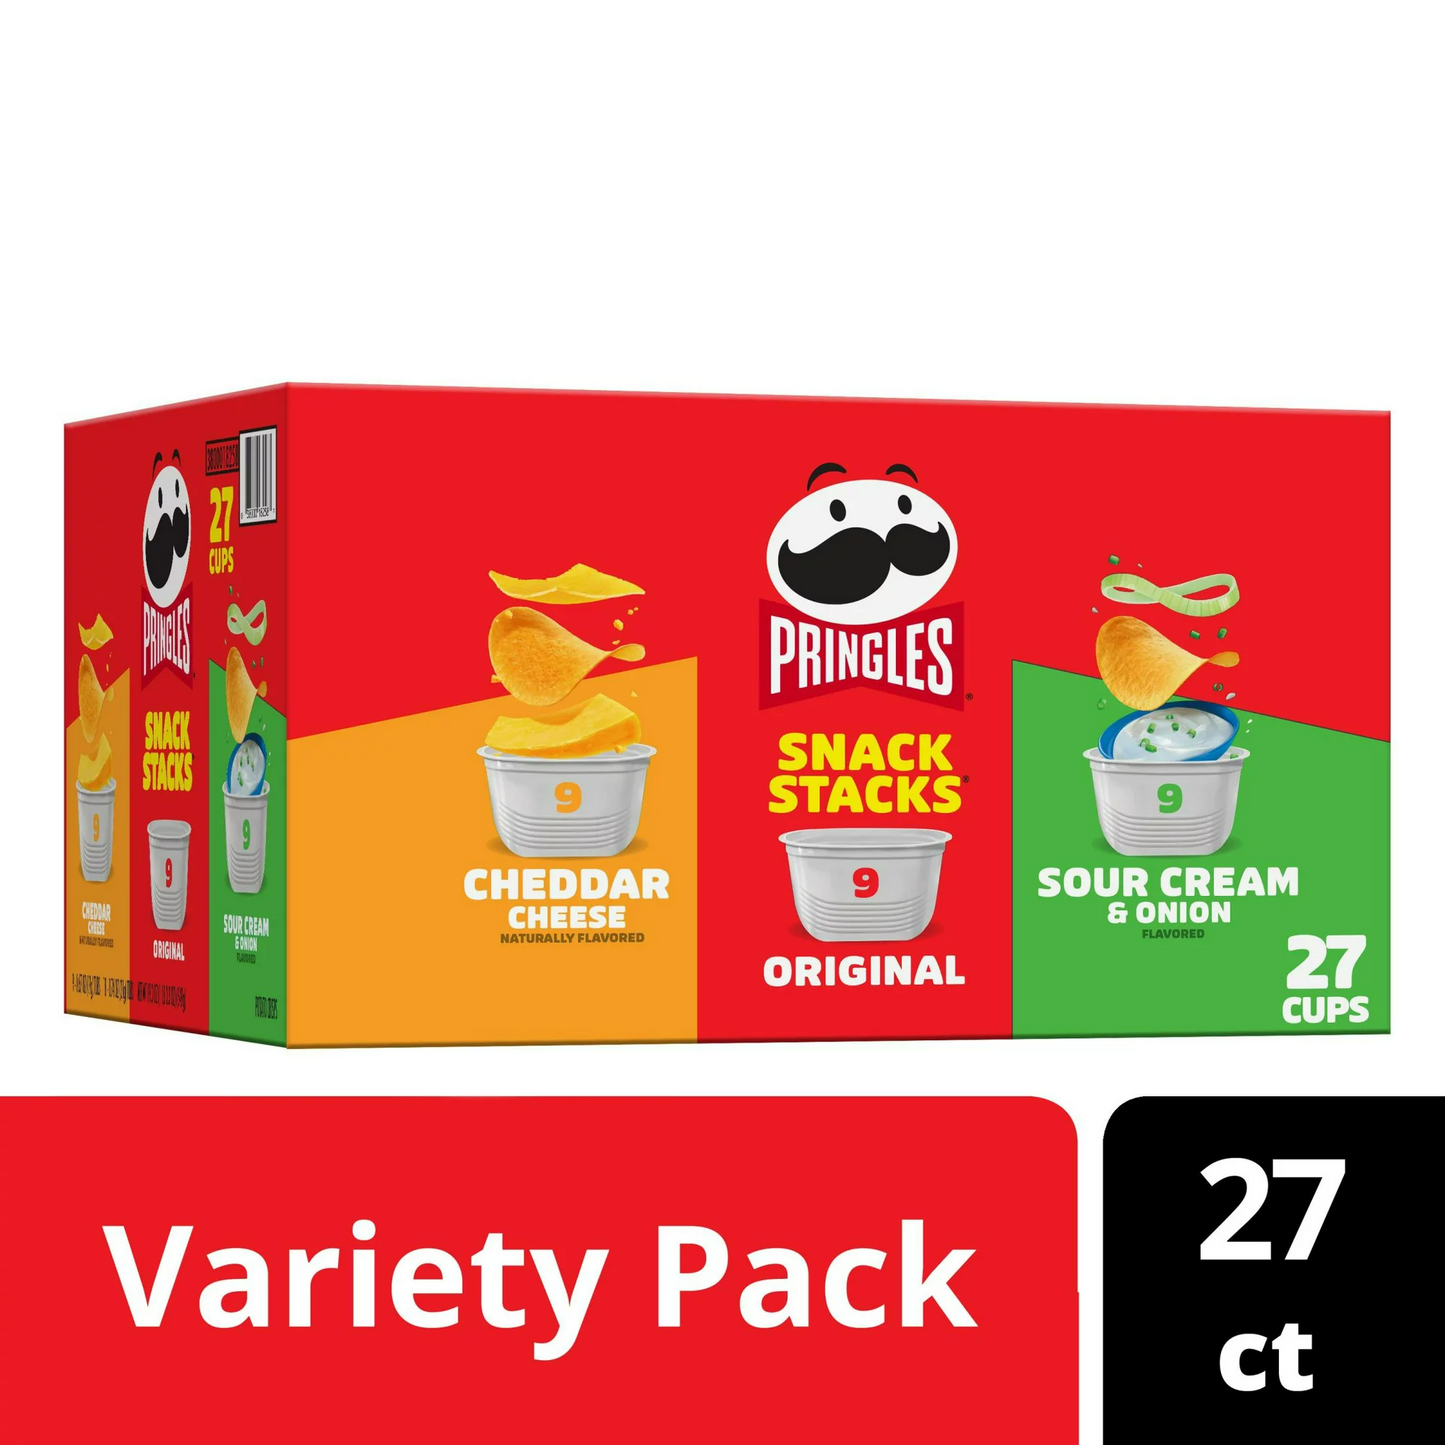 Pringles Snack Stacks Variety Pack Potato Crisps Chips, Soy/Soybean-Free, 19.3 oz, 27 Count